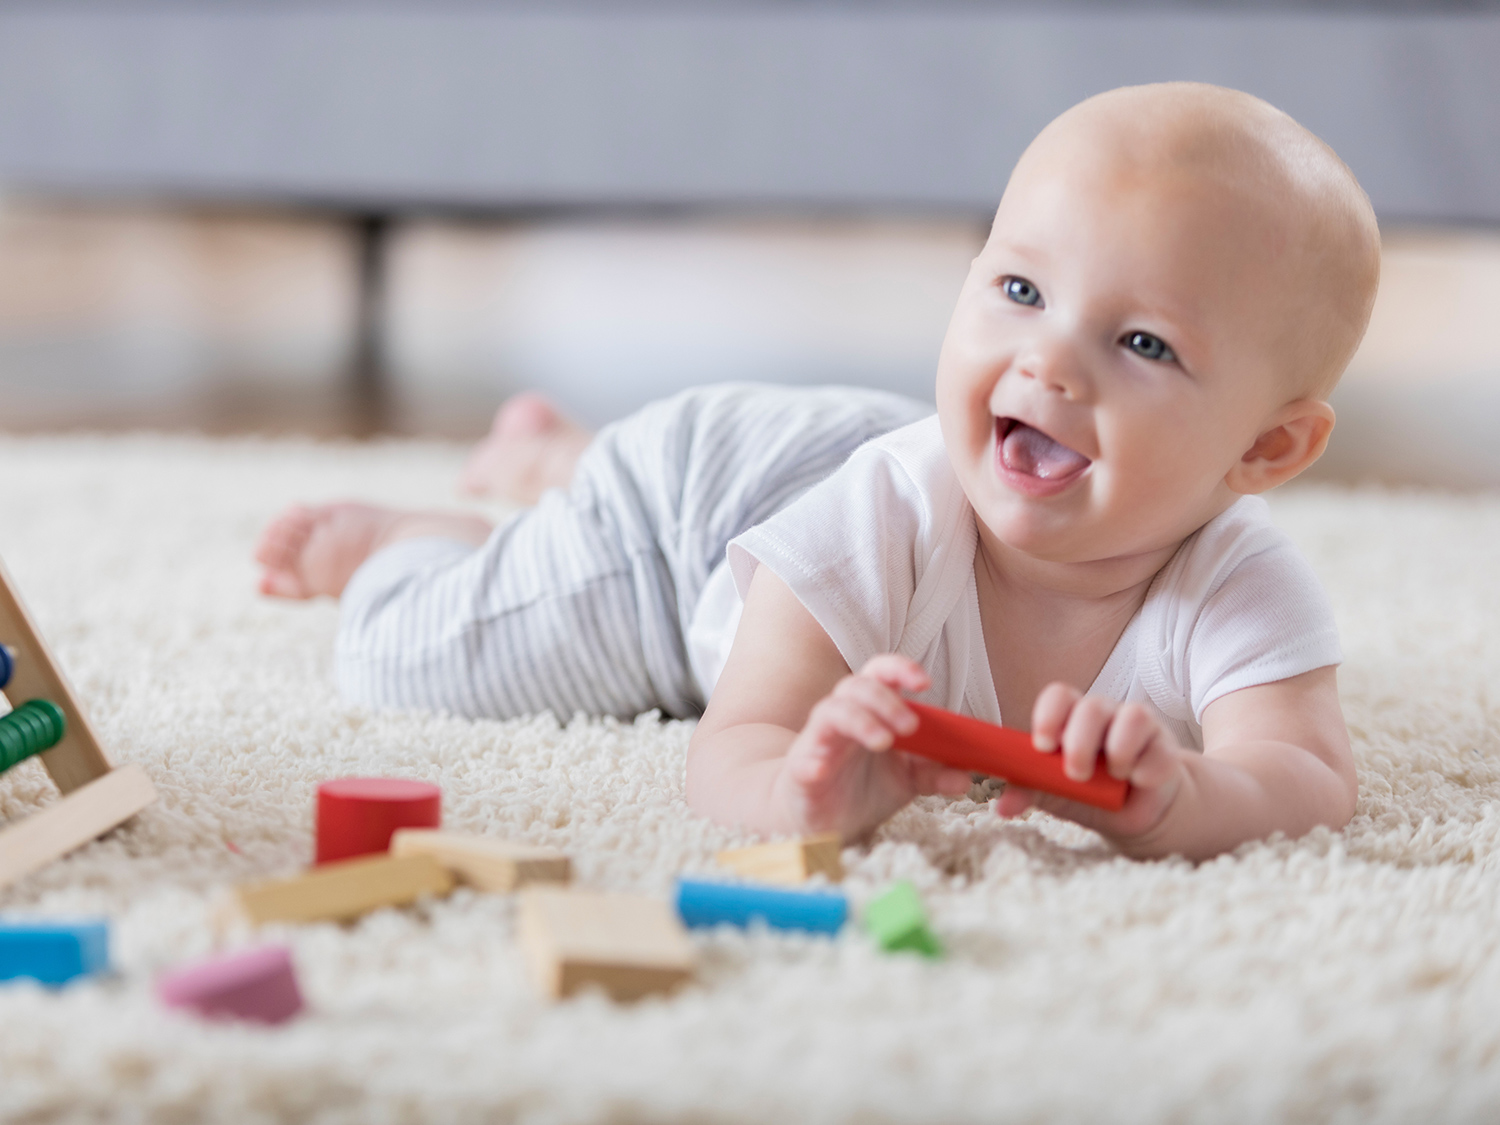 Learning Activities for Babies and Toddlers Age 0-2 - The OT Toolbox